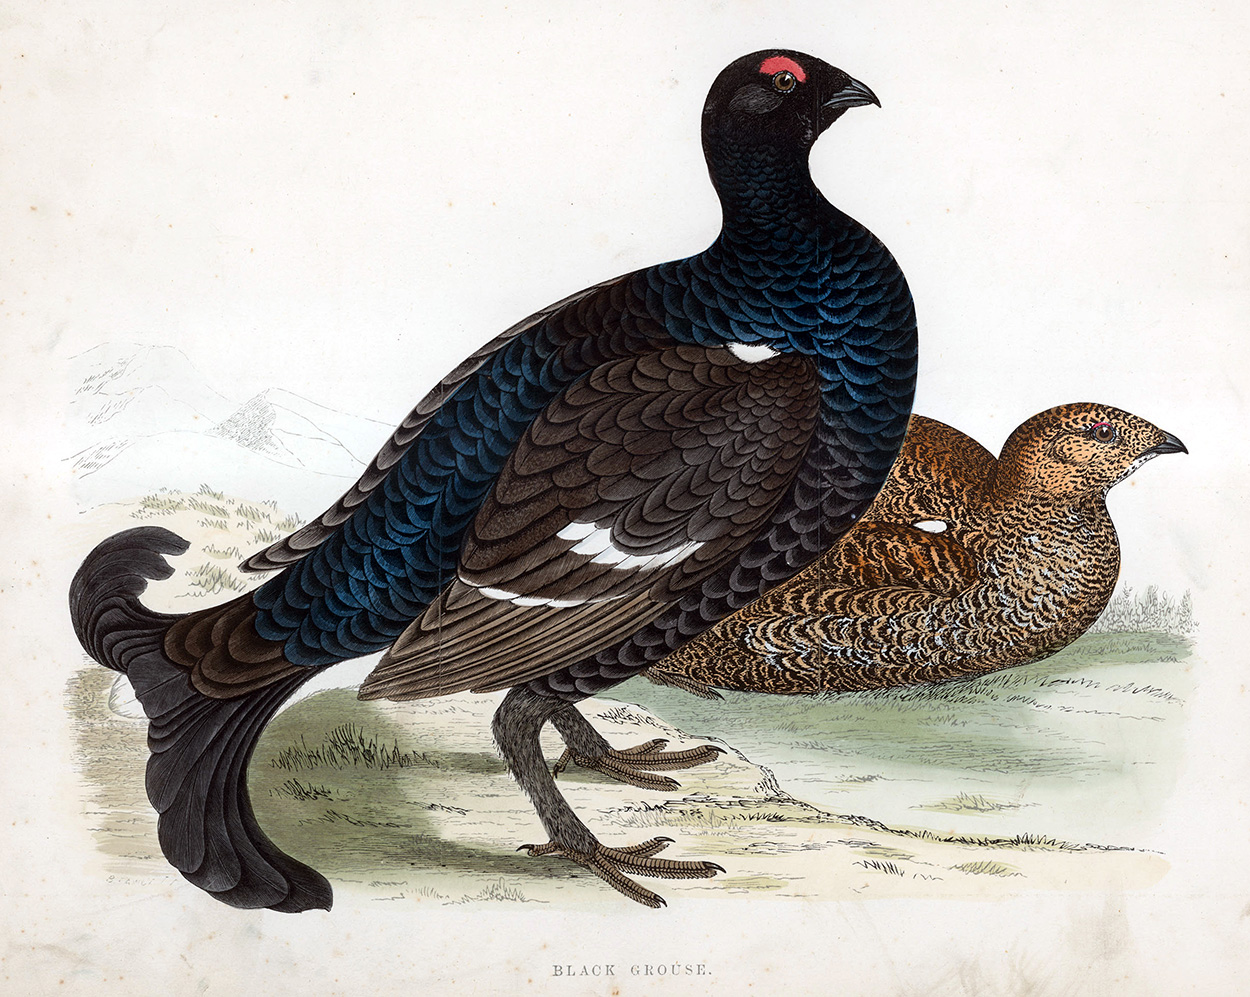 Black Grouse - hand coloured lithograph 1891 (Print) art by Beverley R Morris at The Illustration Art Gallery